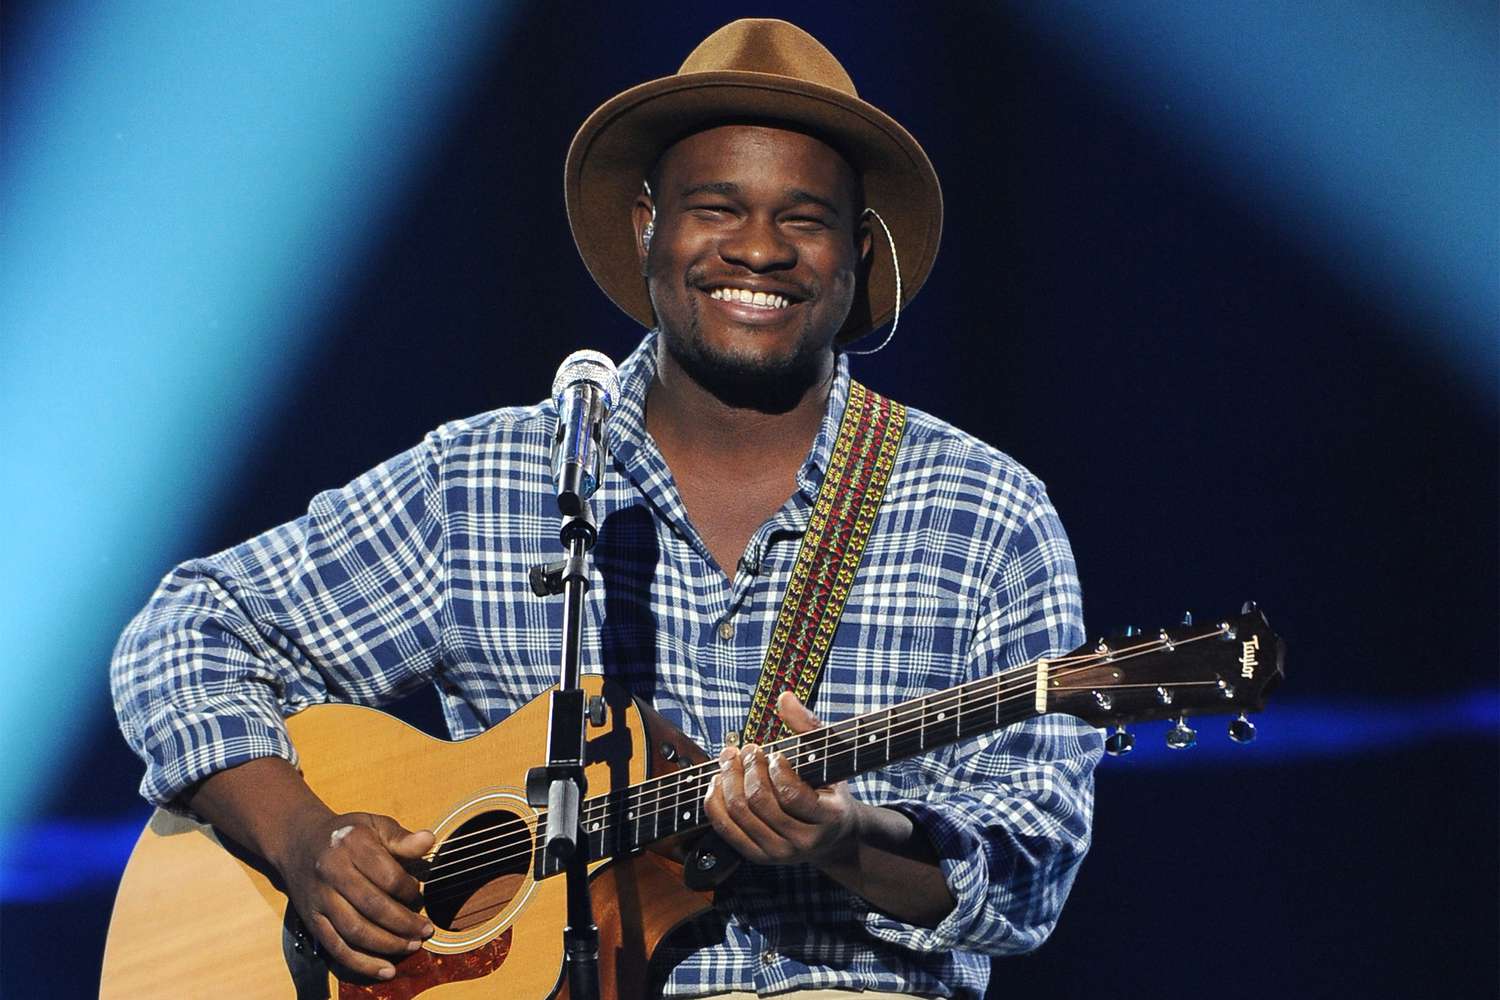 Contestant C.J. Harris performs onstage on FOX's "American Idol" Season 13 Men Perform Live Show on February 19, 2014 in Hollywood, California.